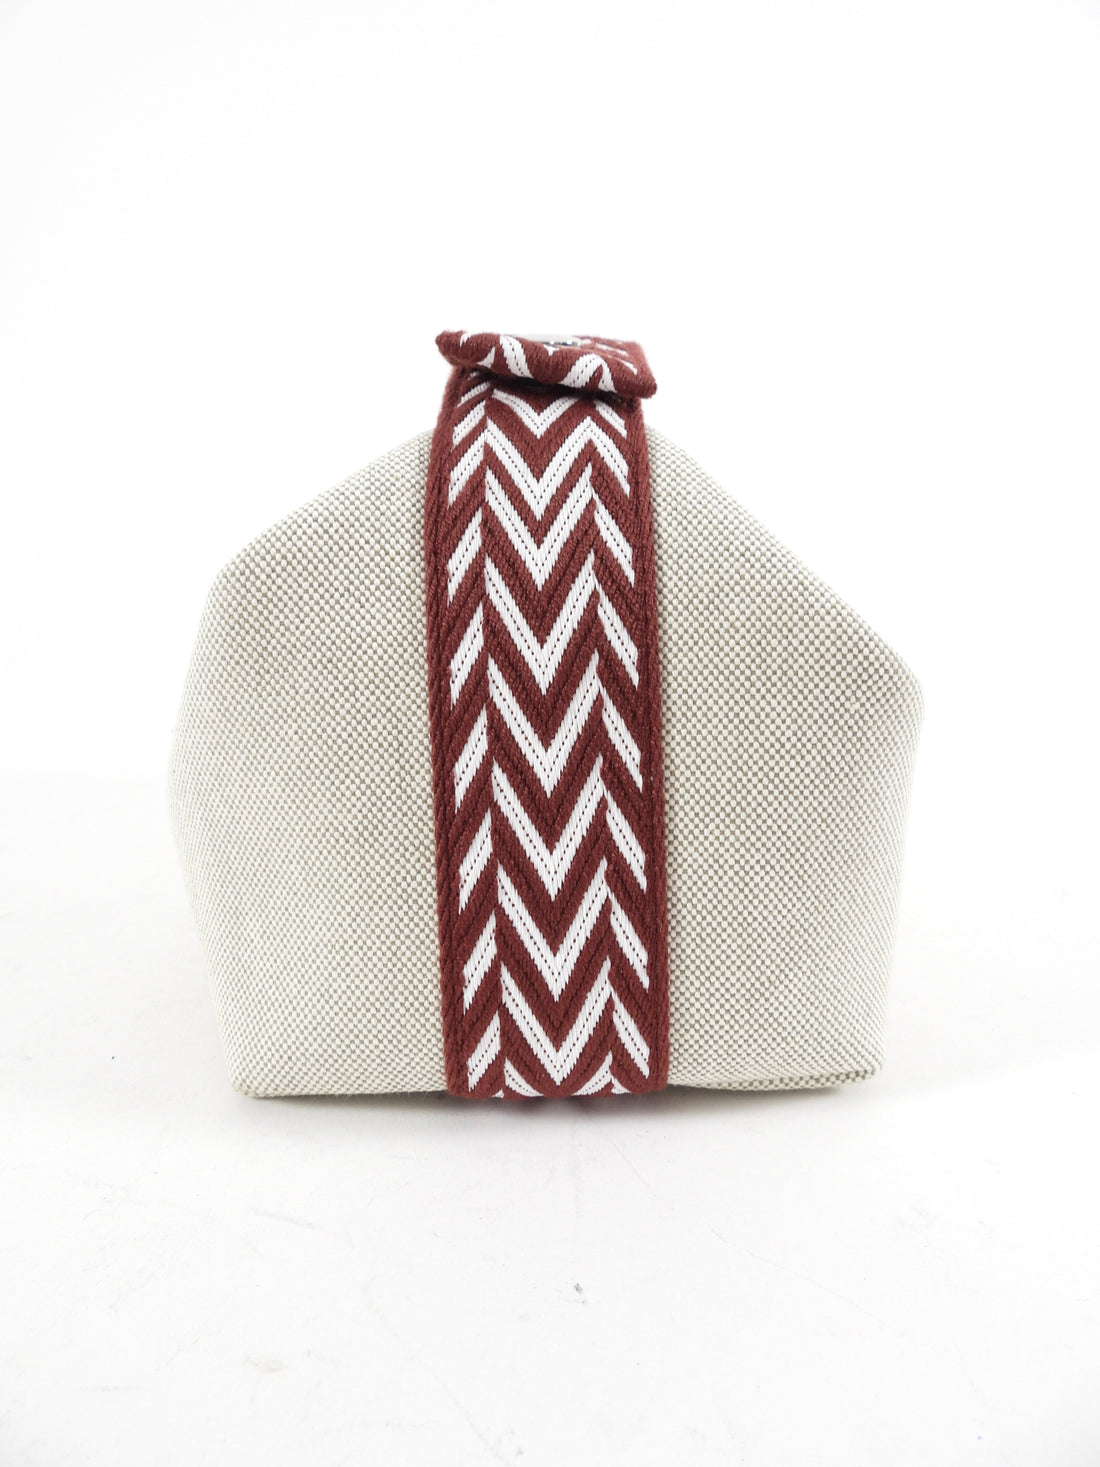 Hermes Canvas and Burgundy Bride A Brac Small Cosmetic Bag